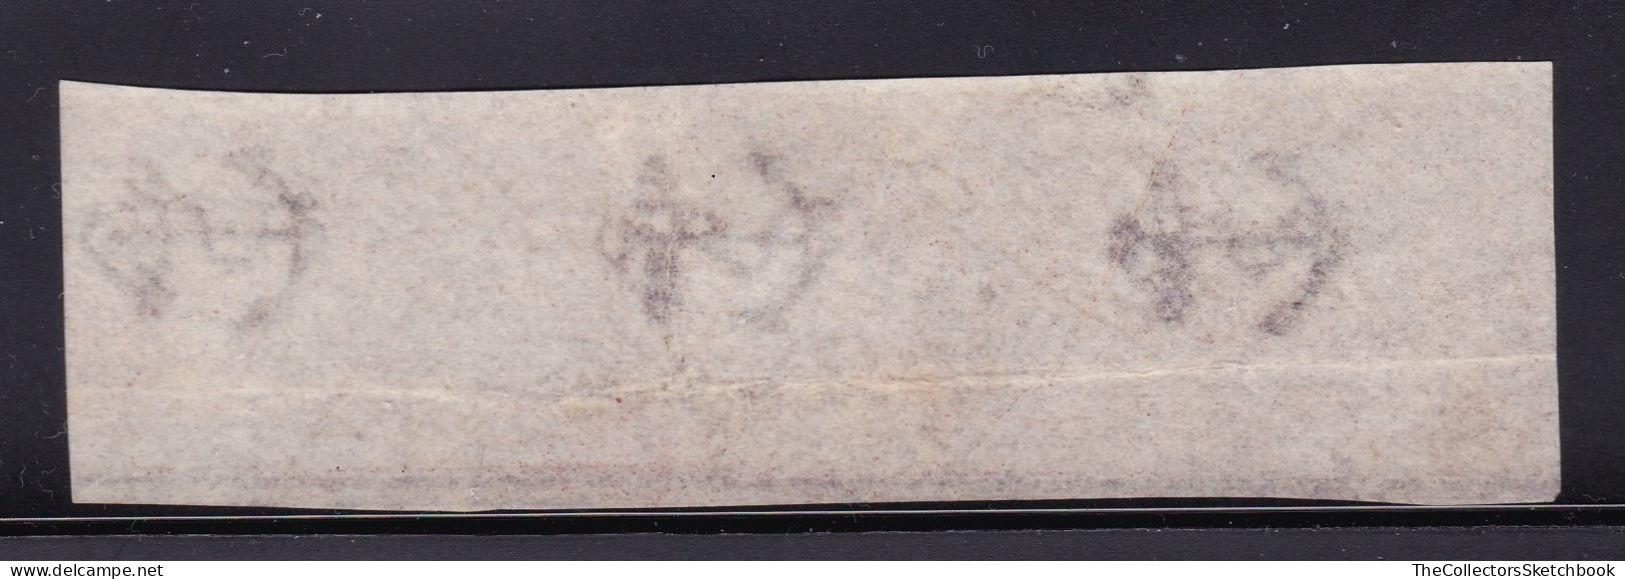 GB Fiscals / Revenues Life Policy 6d -  Red - Brown Barefoot 2. Watermark Fouled Anchor With Stock  Average Used - Revenue Stamps